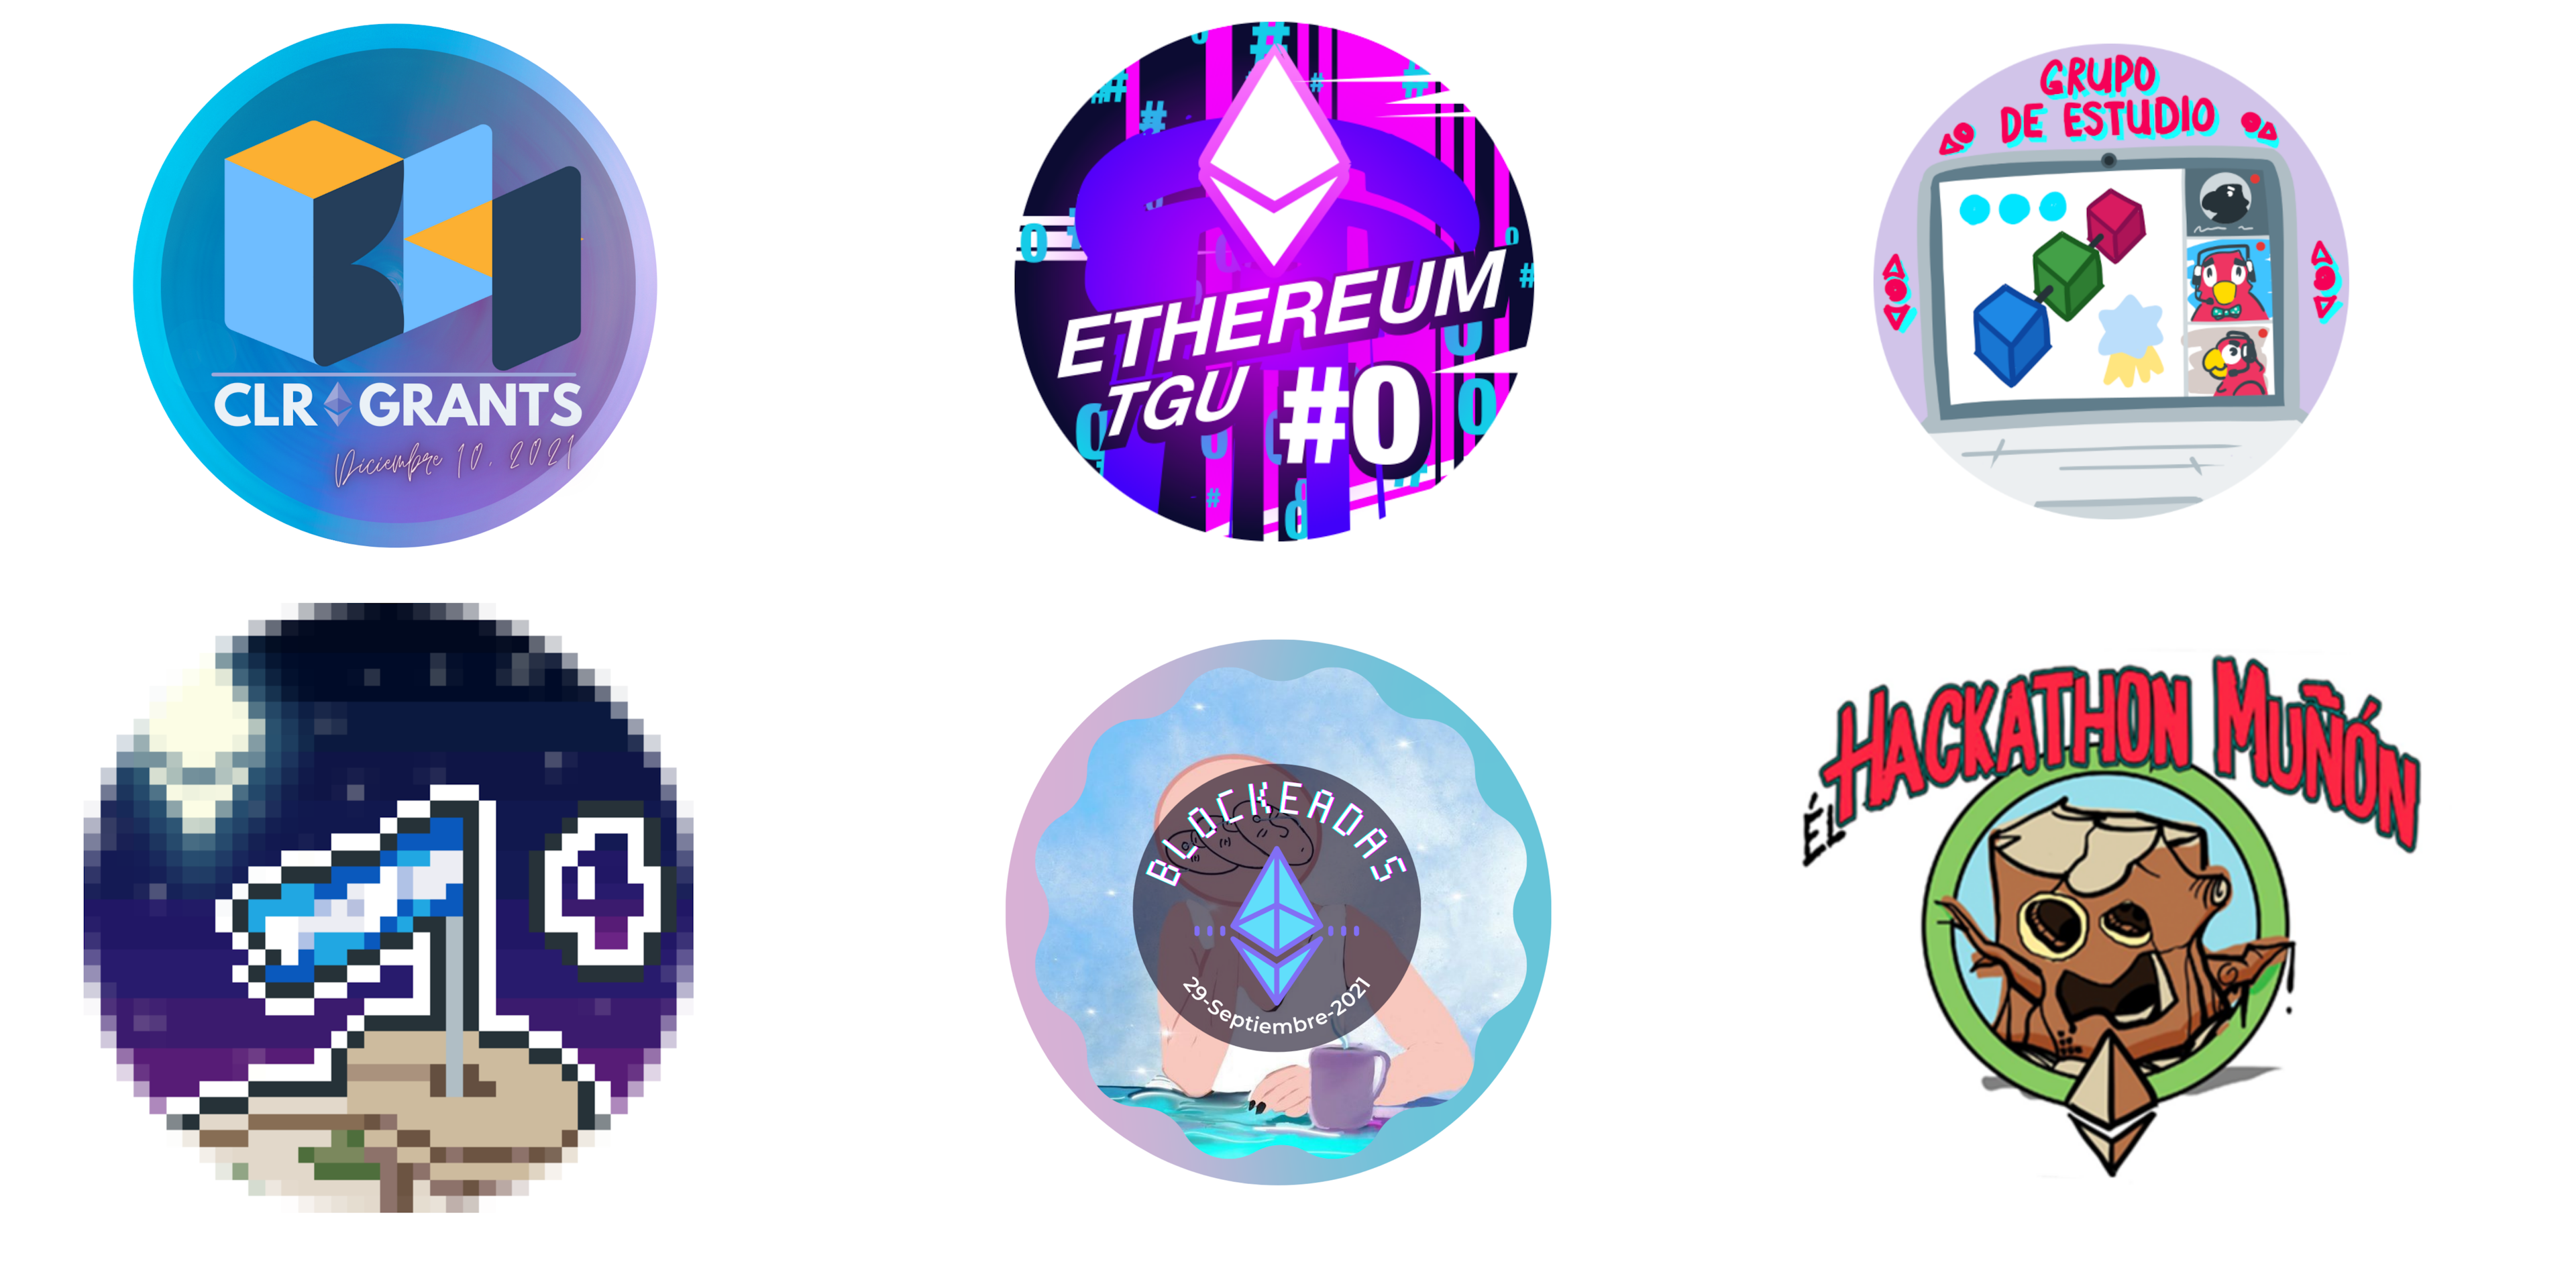 Some of the POAPs that have been granted by the community